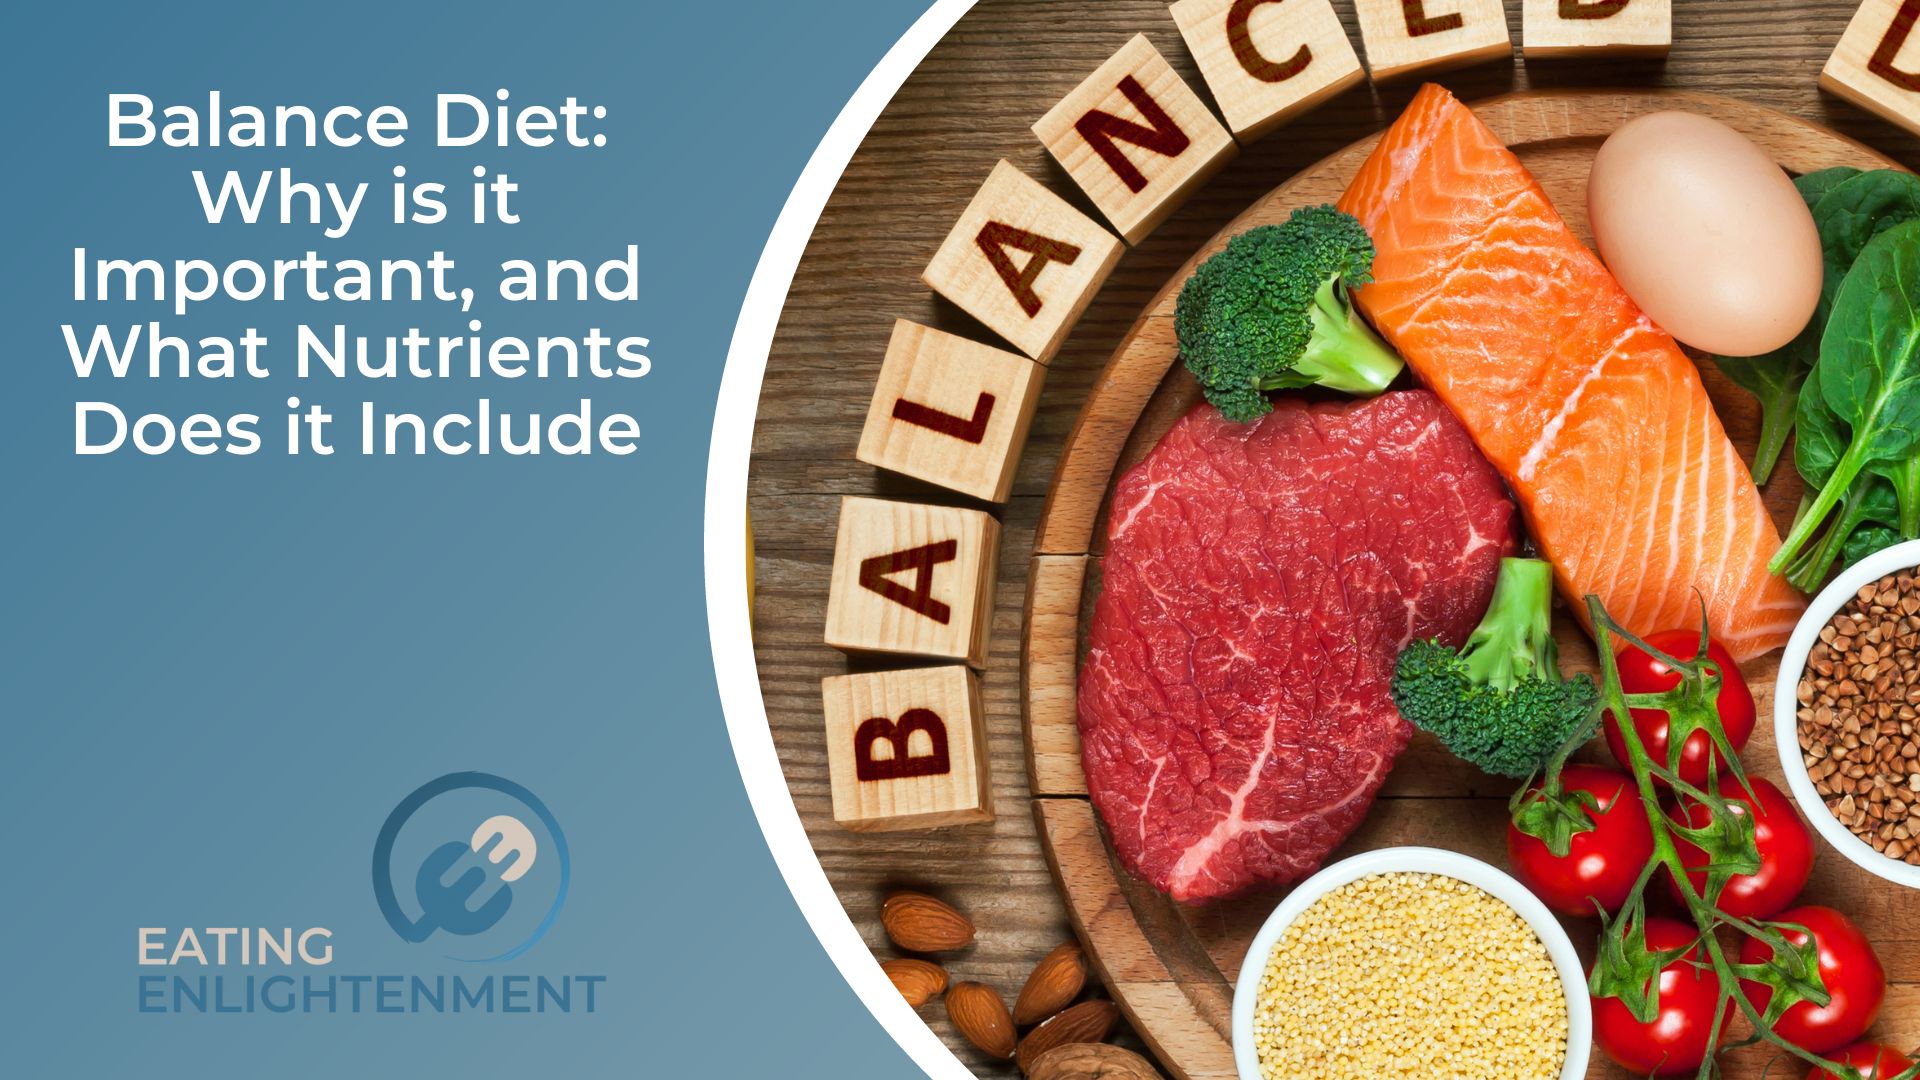 Balance Diet Why is it Important, and What Nutrients Does it Include